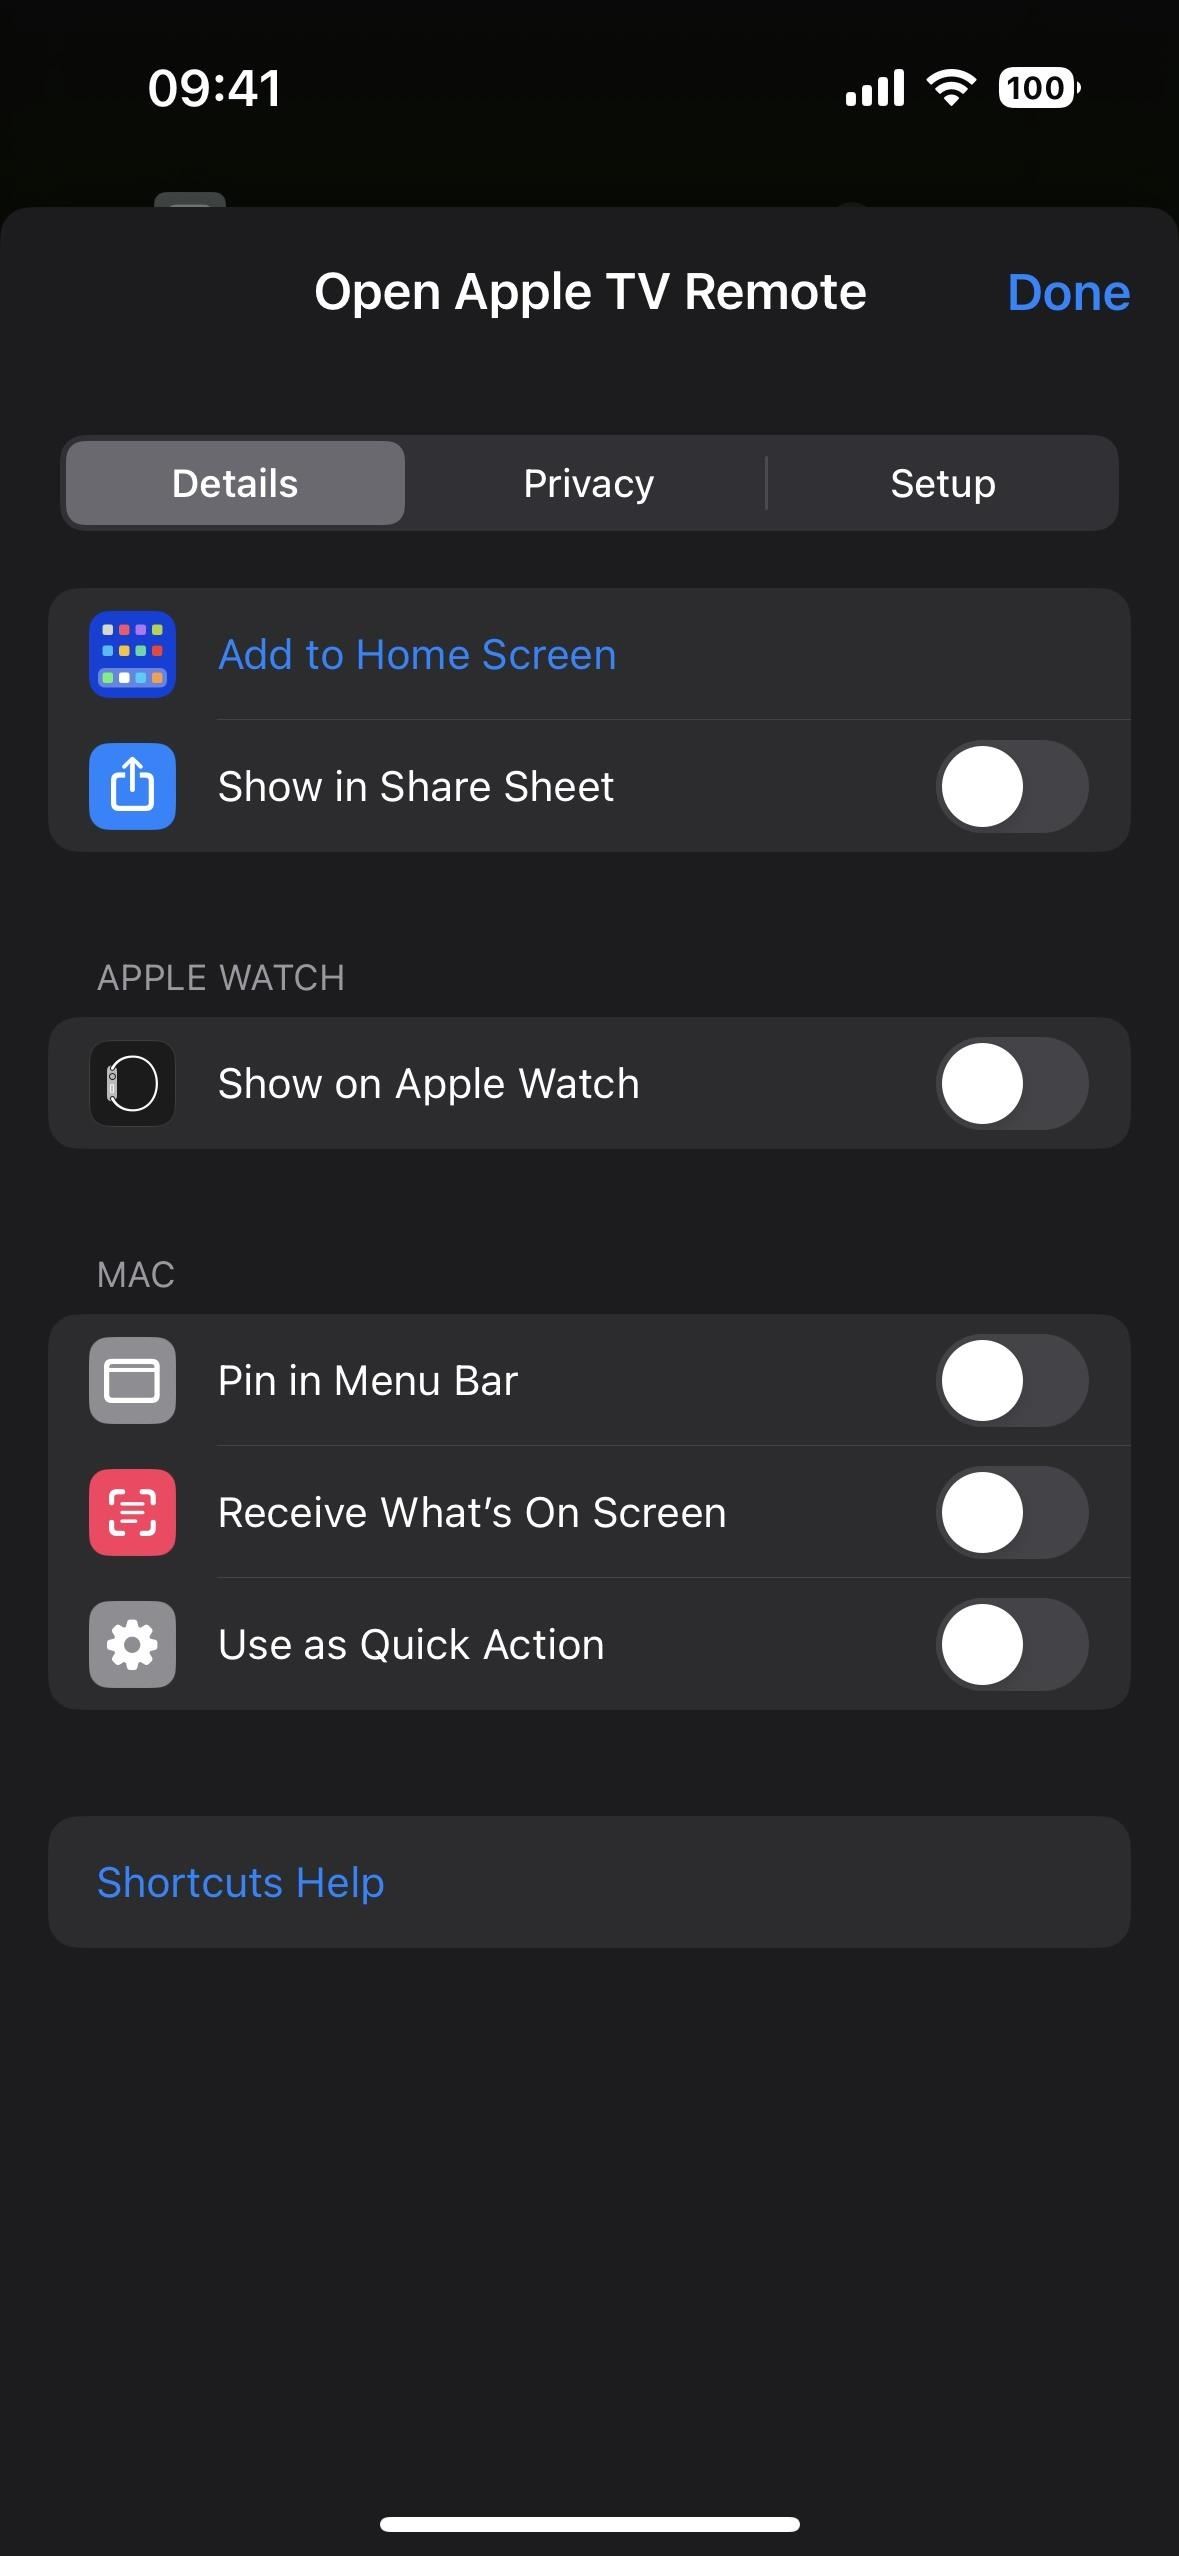 Open your iPhone's secret Apple TV Remote app to the Home screen, App Library, Siri, and more - no Control Center needed